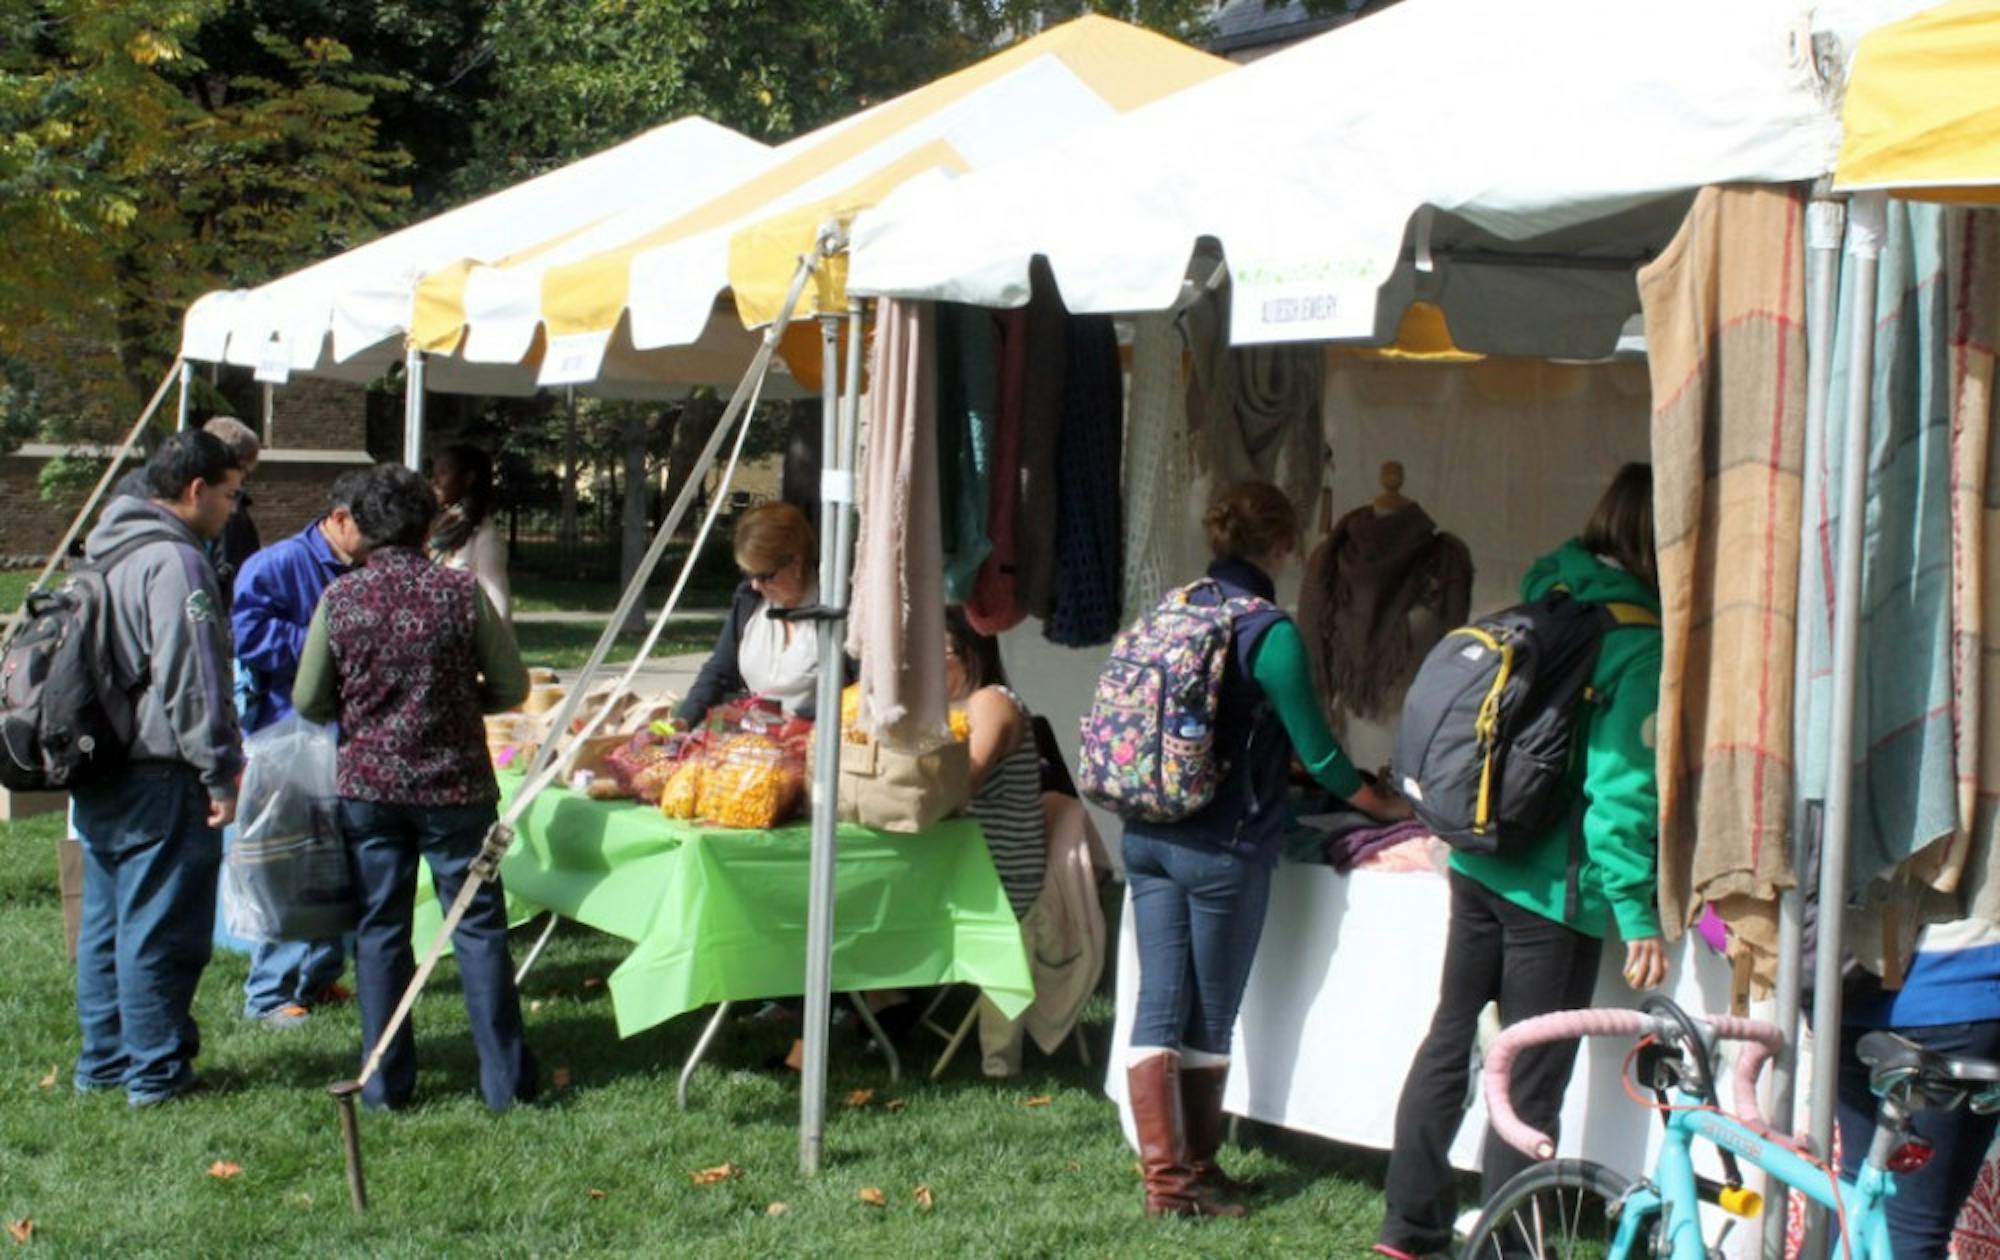 Student Government sponsored Quad Markets on Oct. 10 on North Quad. Local vendors sold goods ranging from accessories to produce.